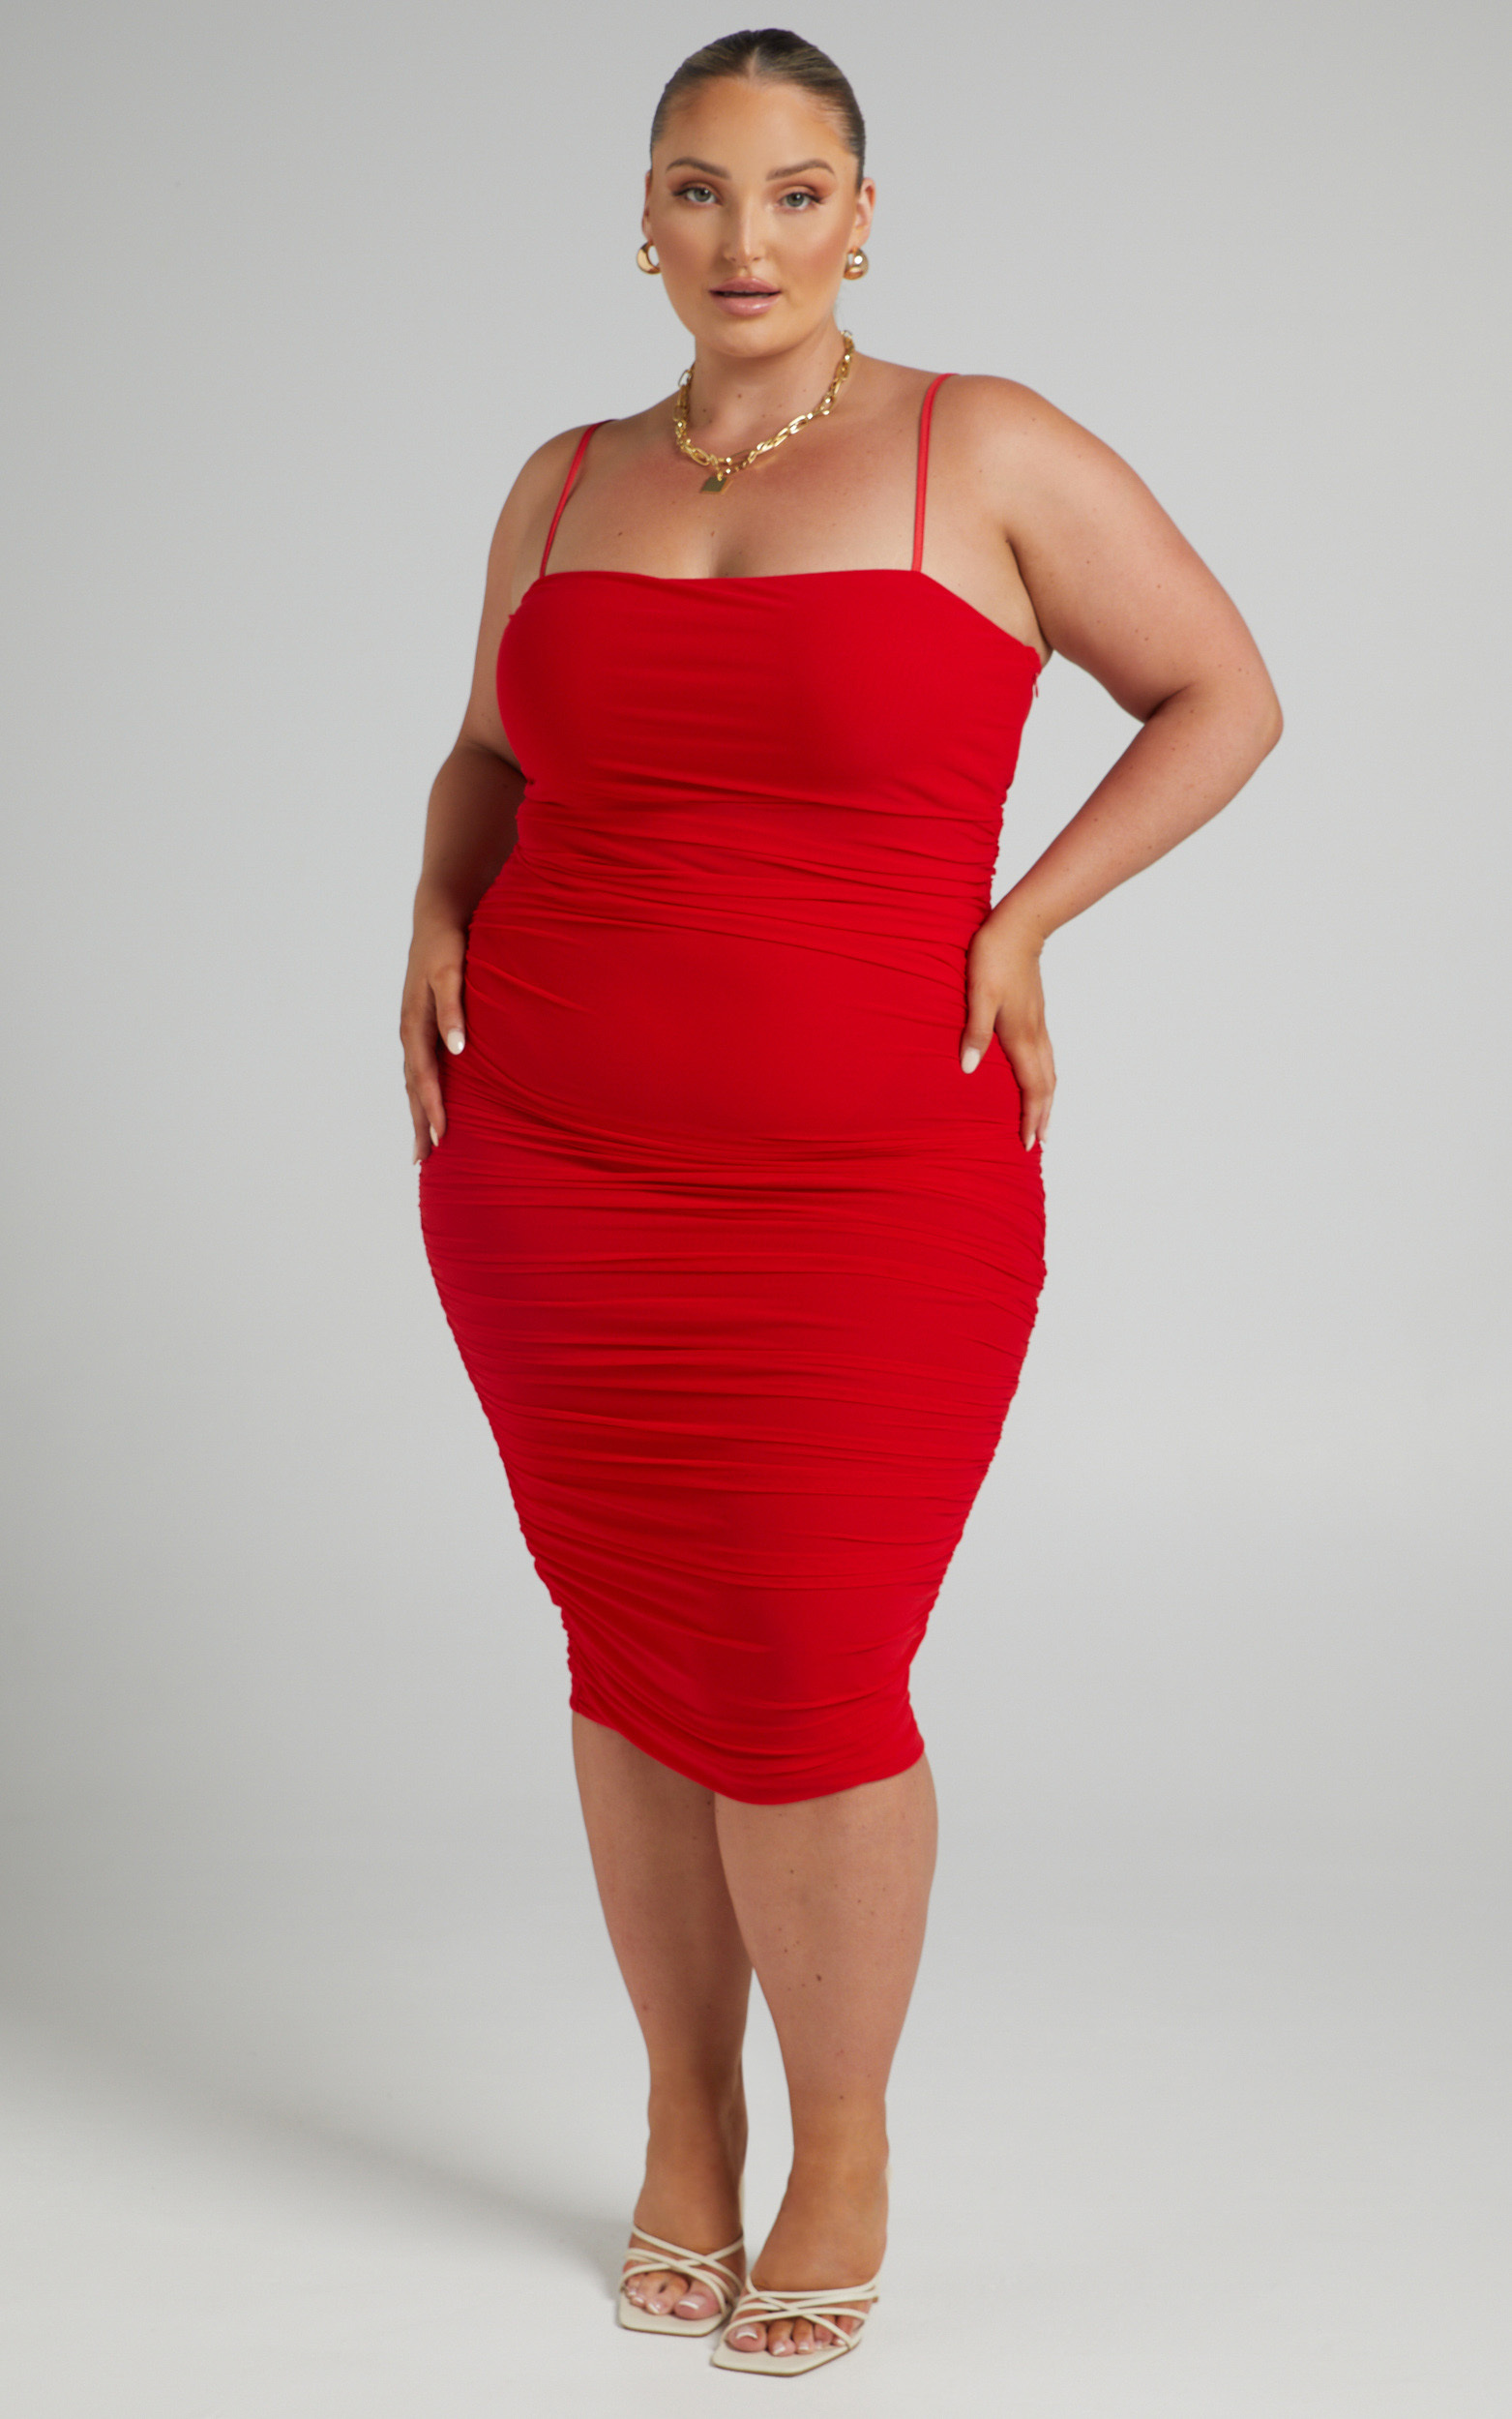 Coming For You Mesh Midi Dress in Red - 04, RED7, hi-res image number null